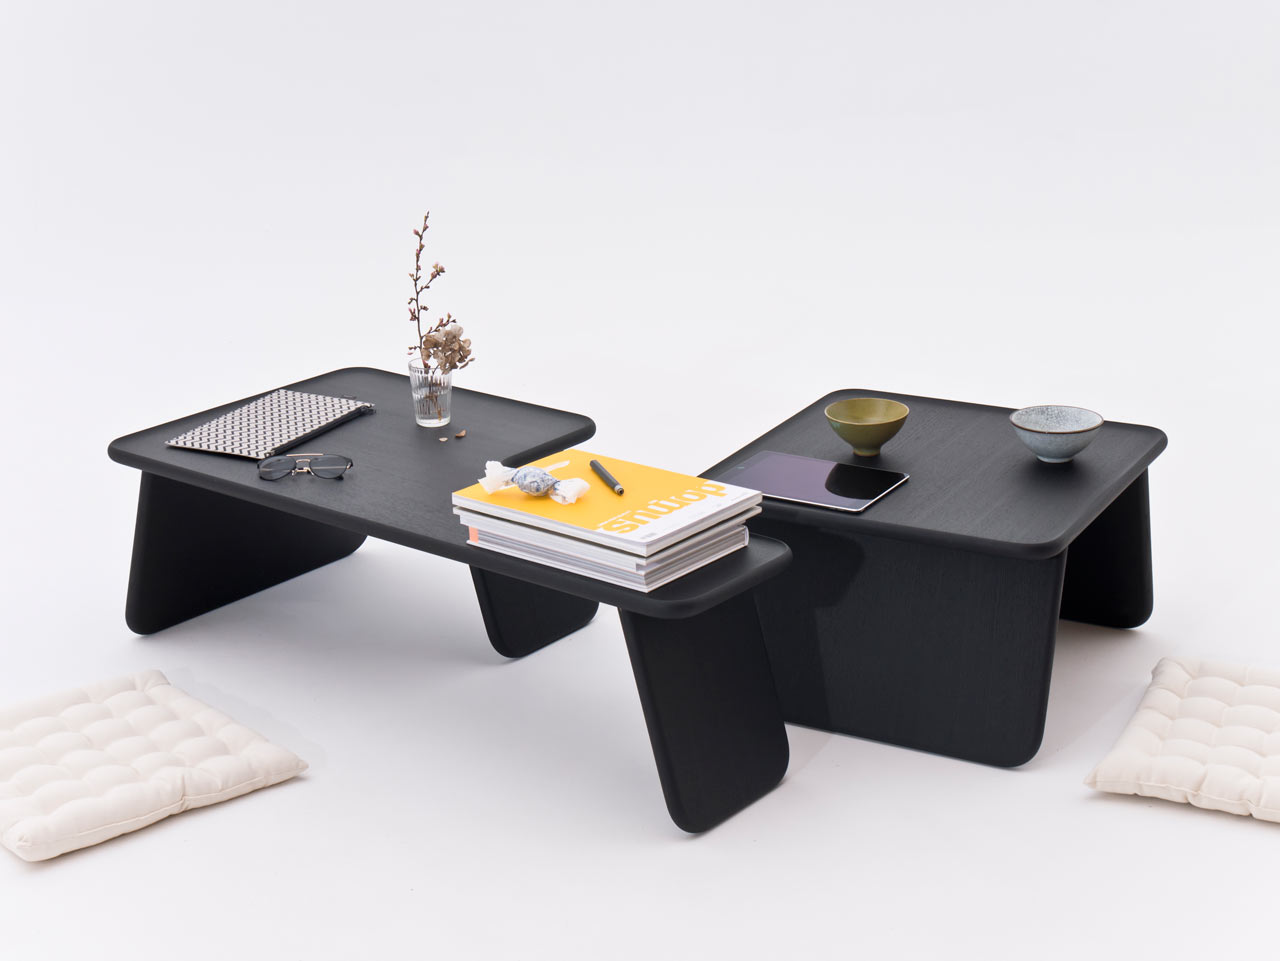 The Bento Tray table collection is inspired by Japanese bento trays and features Japandi aethetics